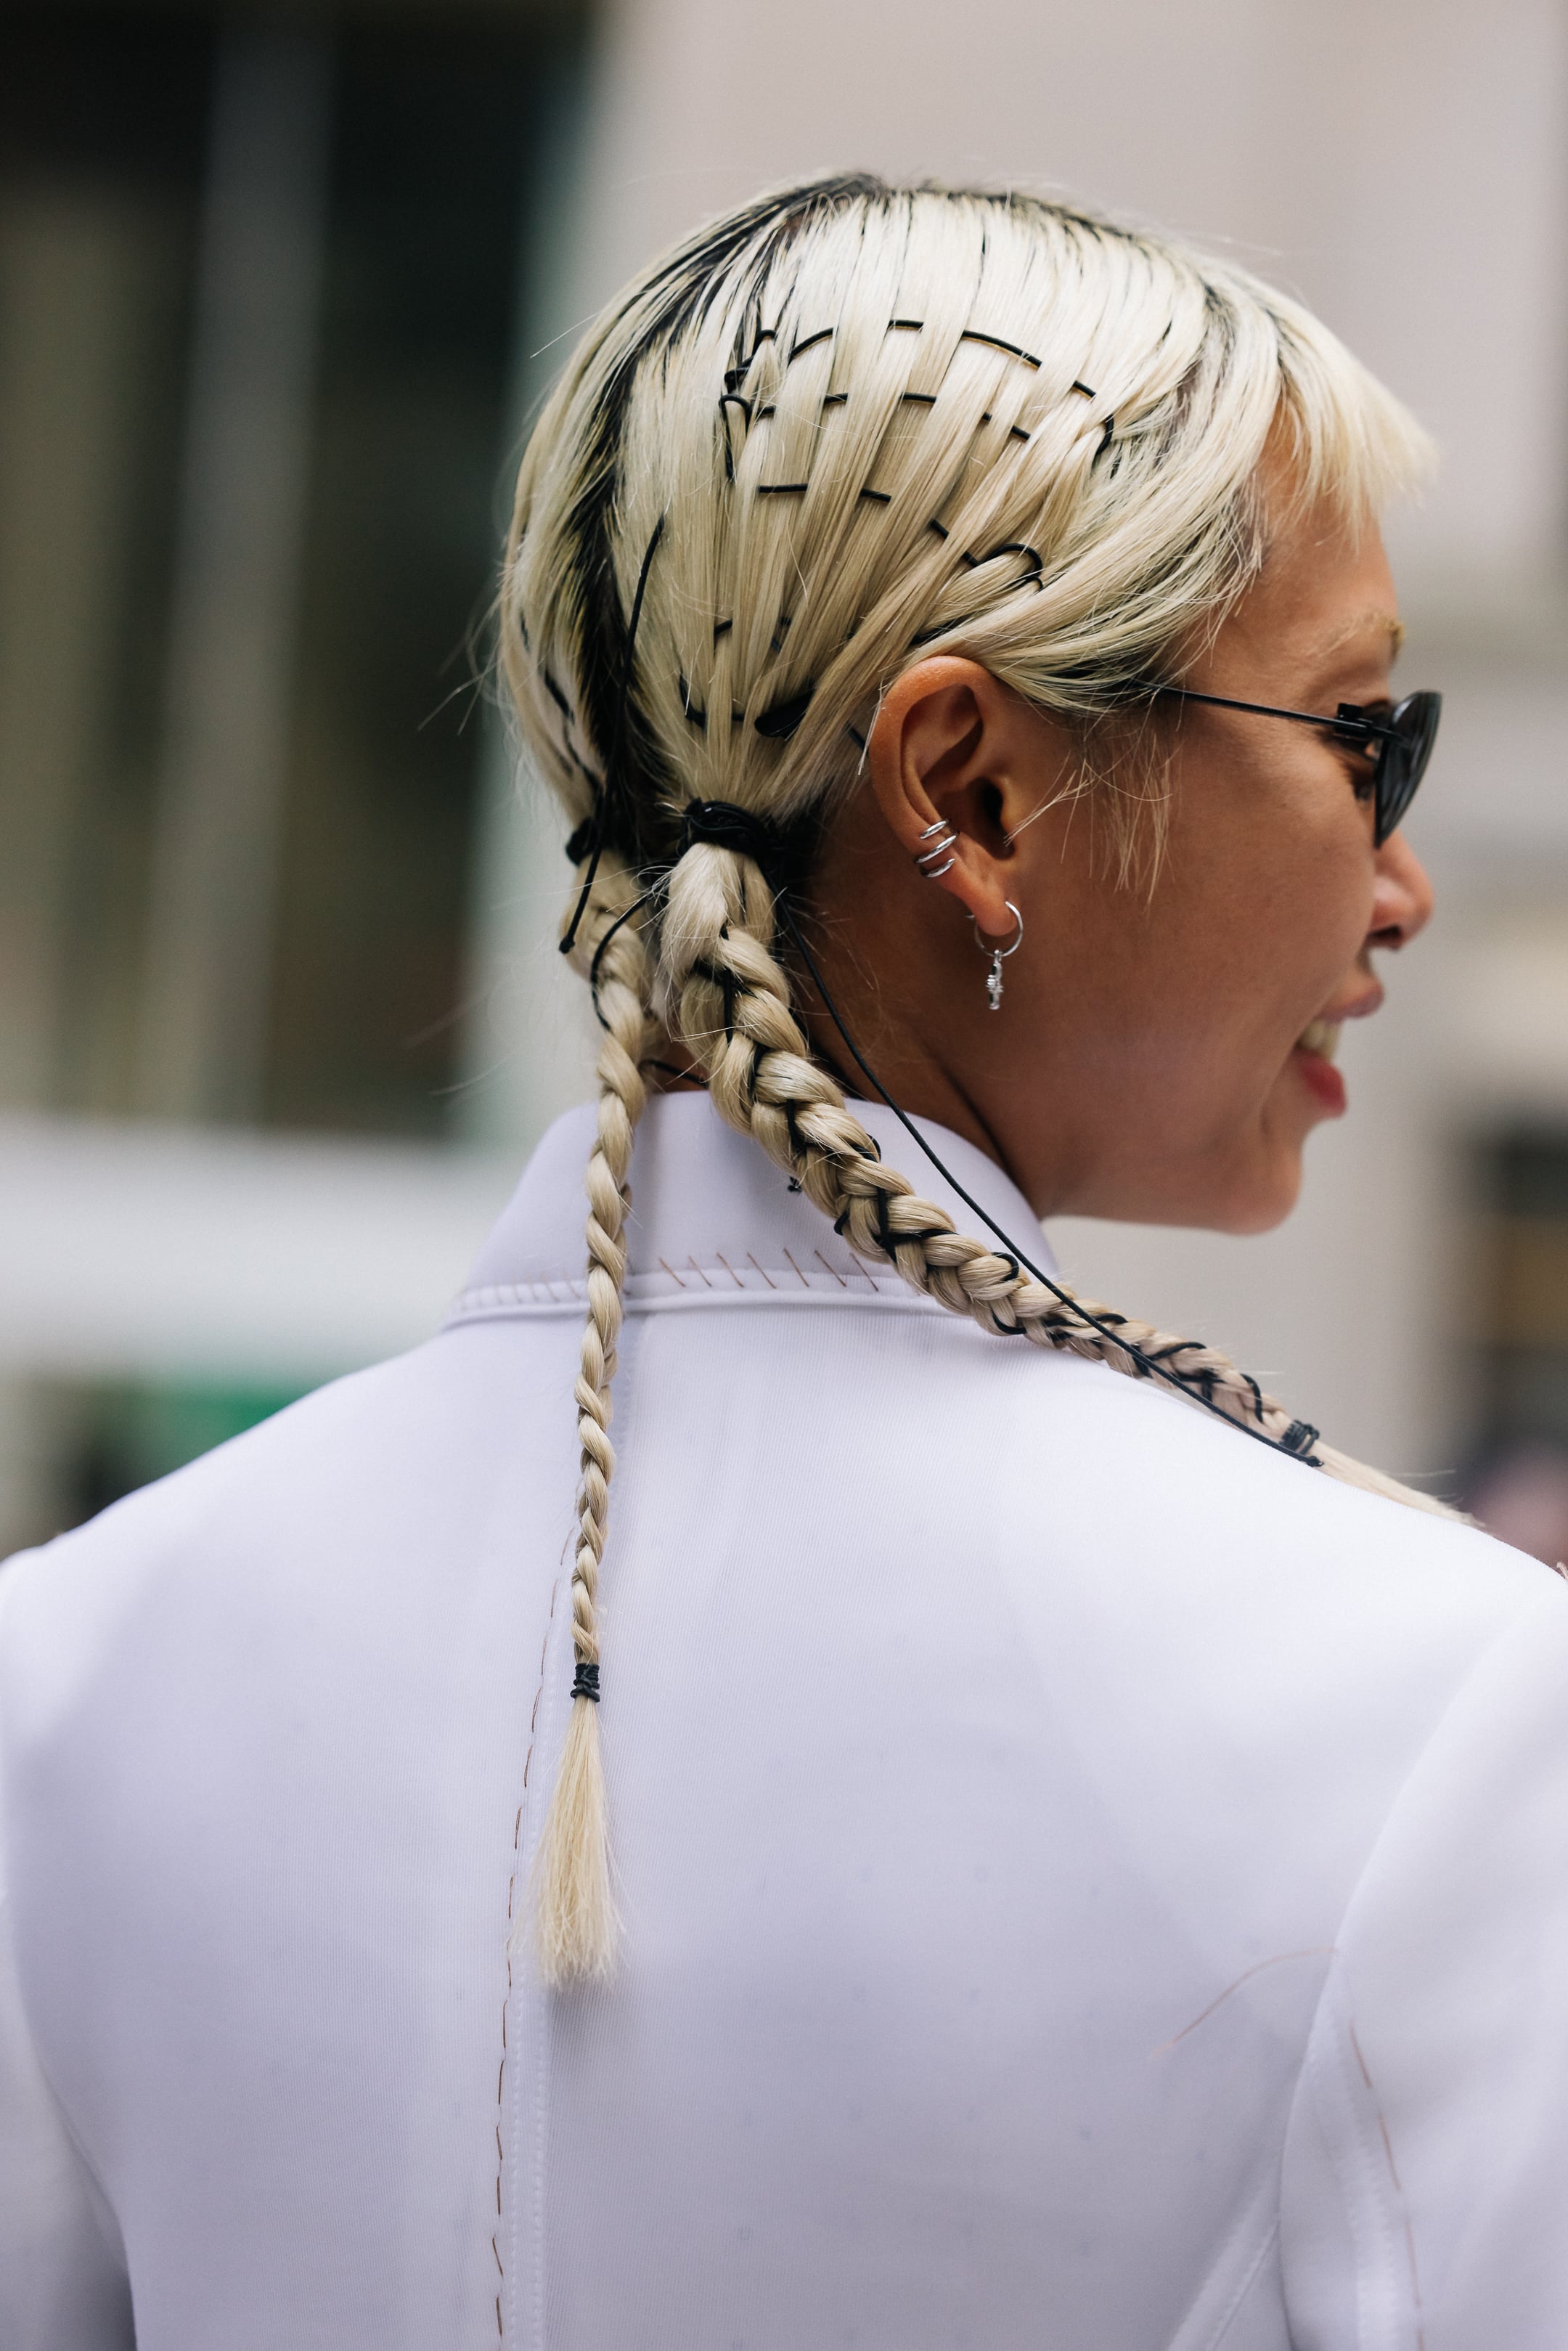 Trending hair accessories for when you still haven't been to the